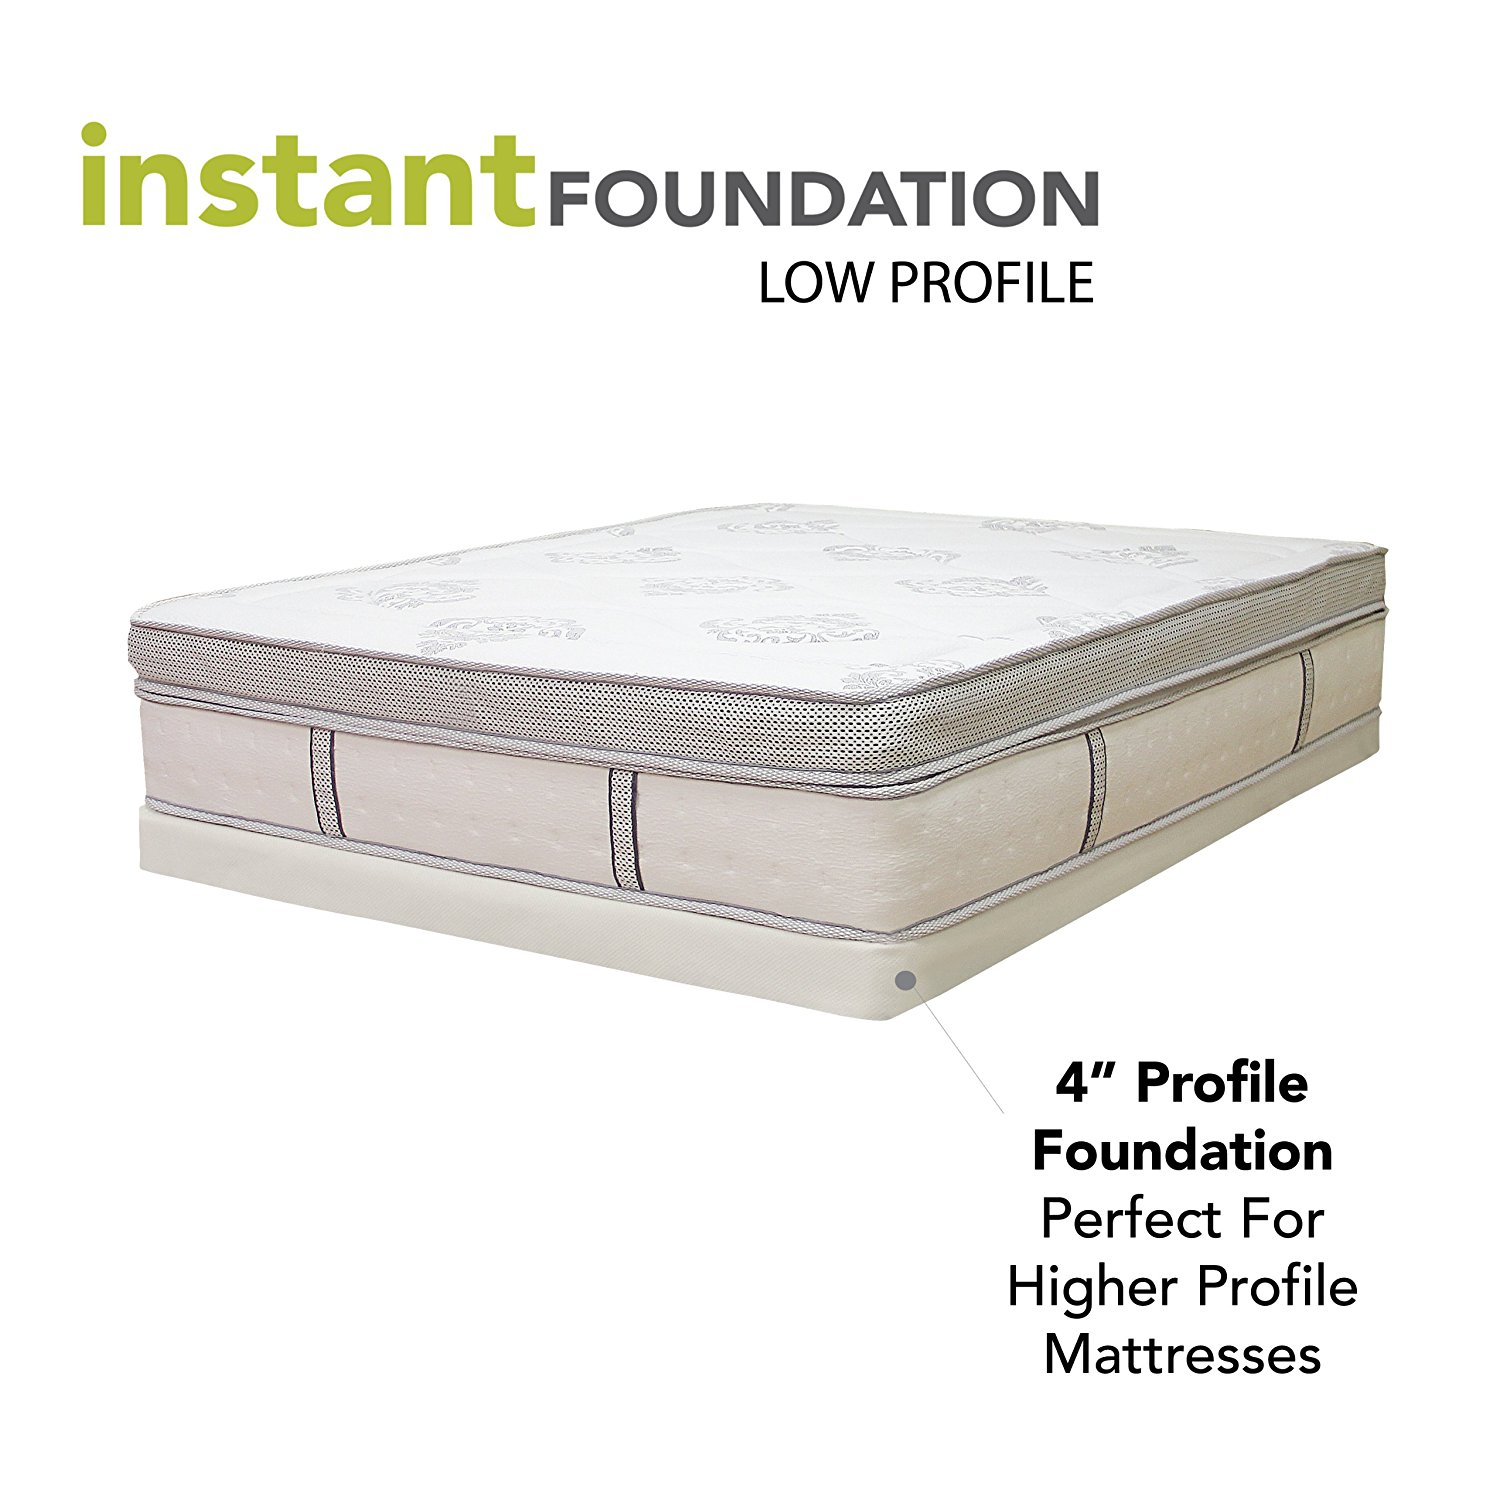 Classic Brands 4 Inch Instant Foundation Low Profile Foundation or Box Spring Replacement, Twin